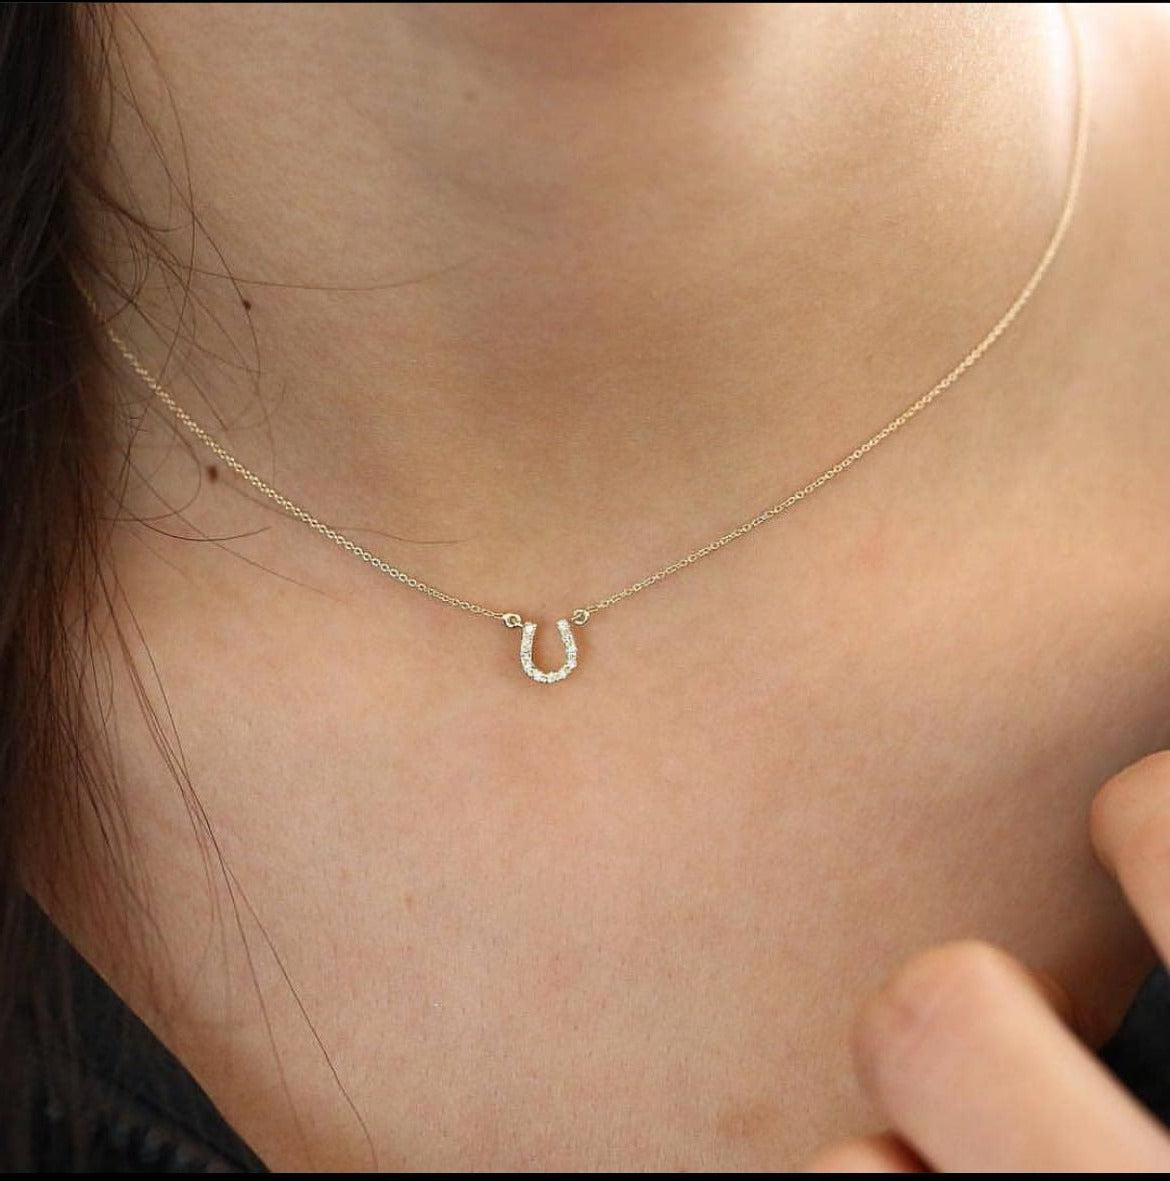 Lucky Sterling Silver Or Gold Horseshoe Necklace By Hersey Silversmiths |  notonthehighstreet.com